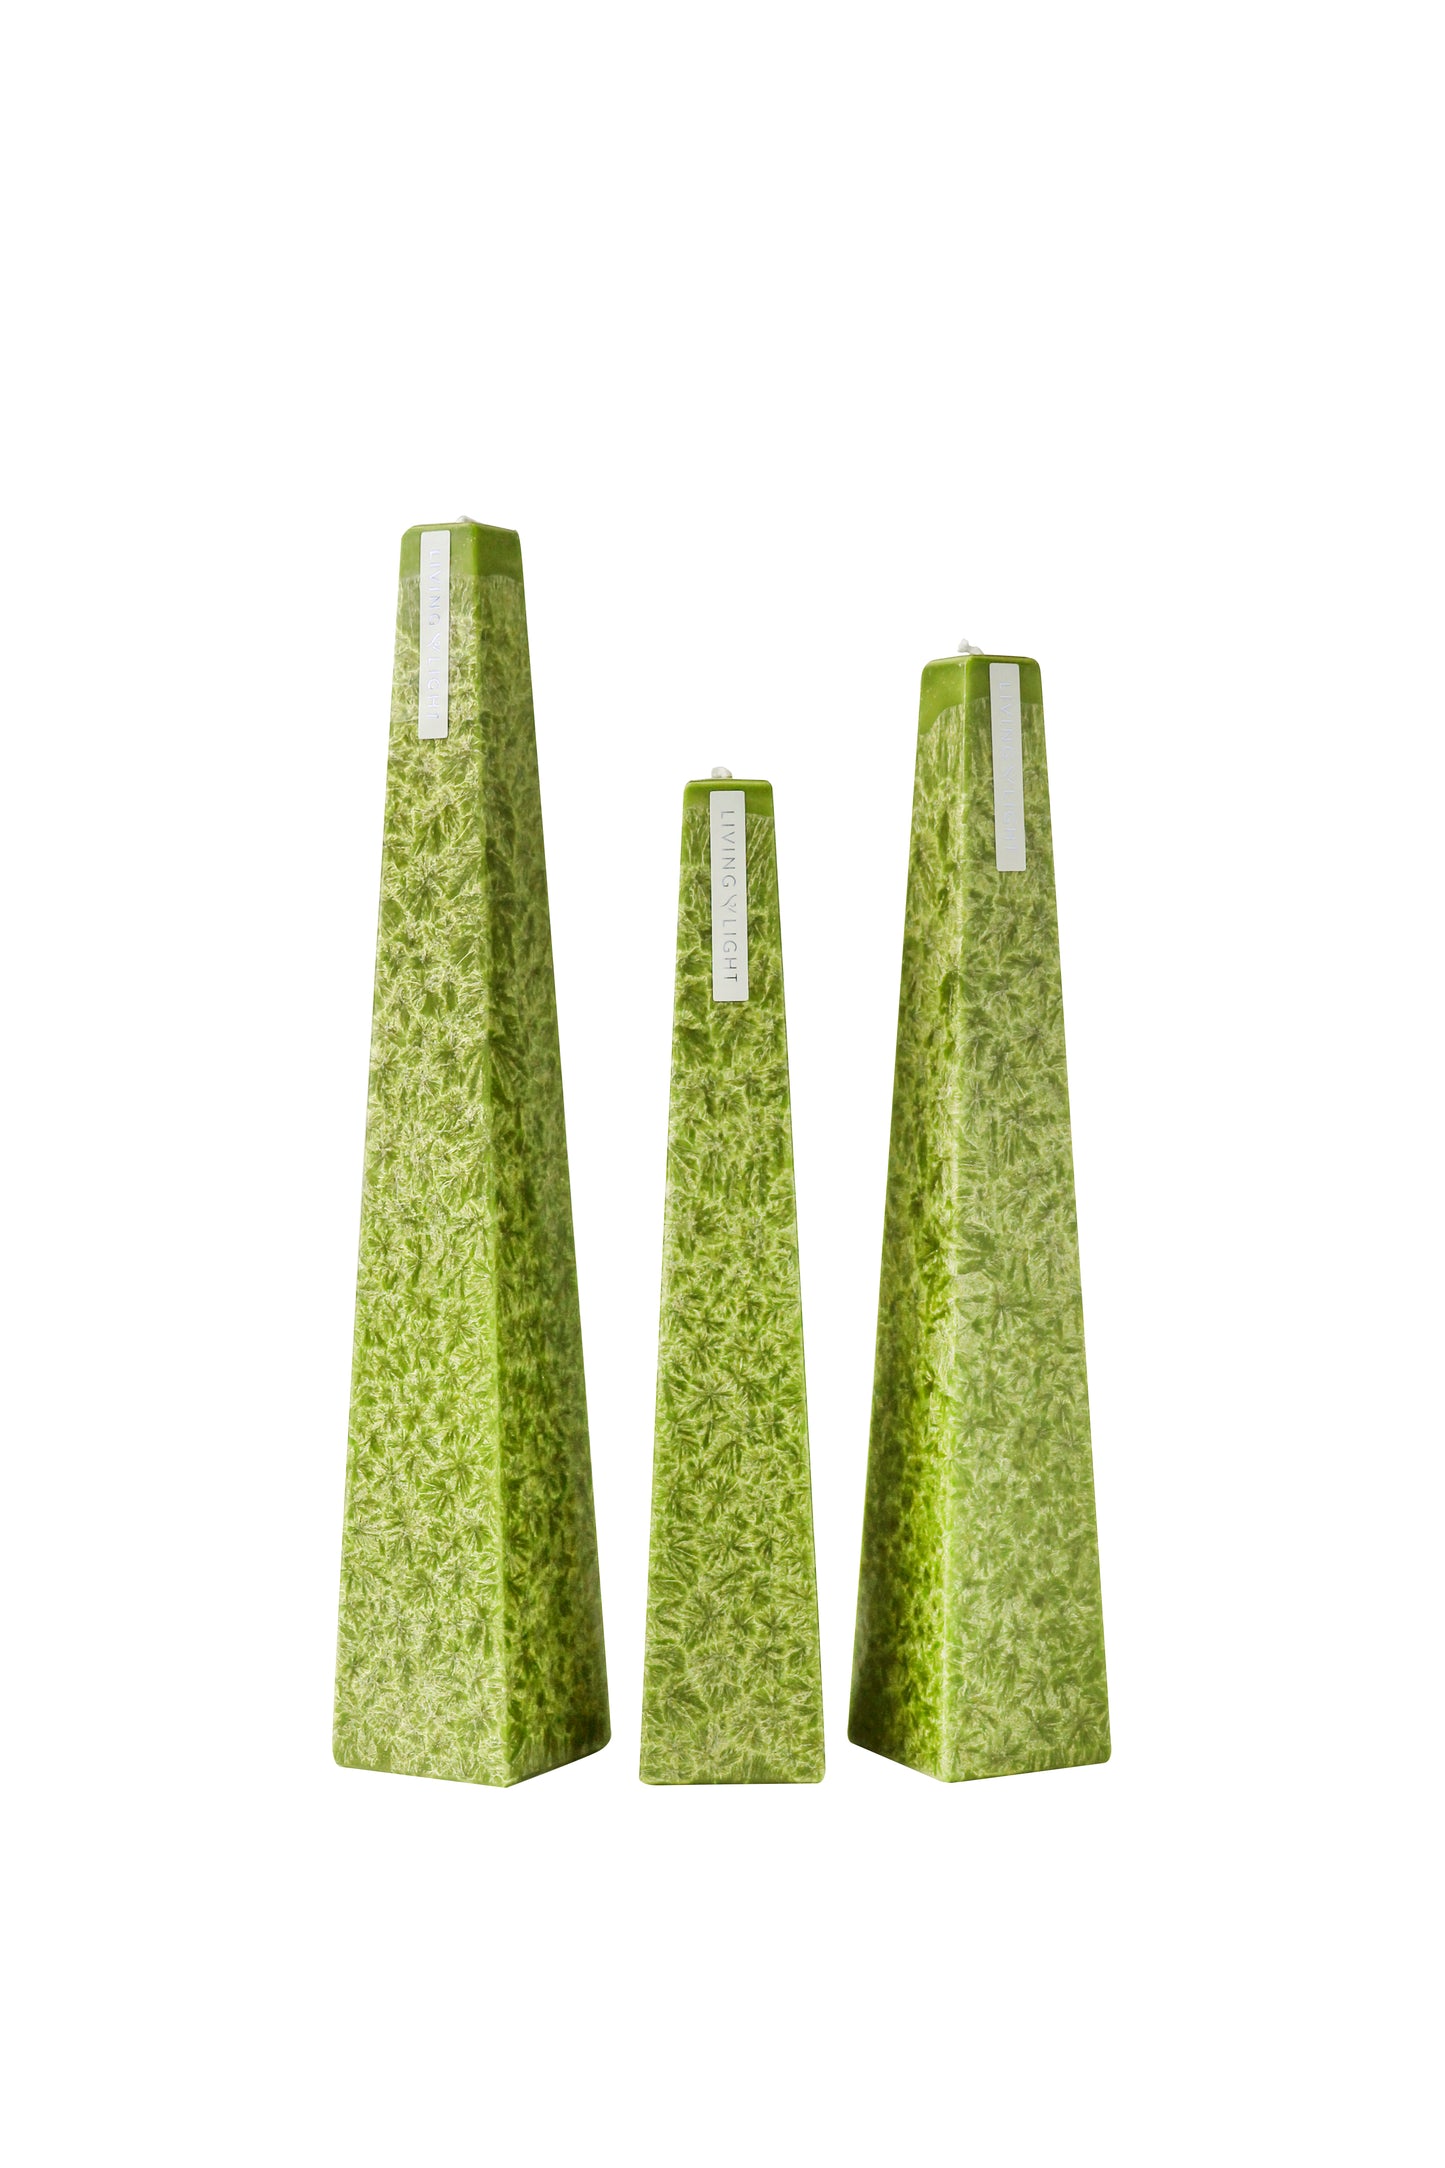 Green Icicle Candle – Lemongrass